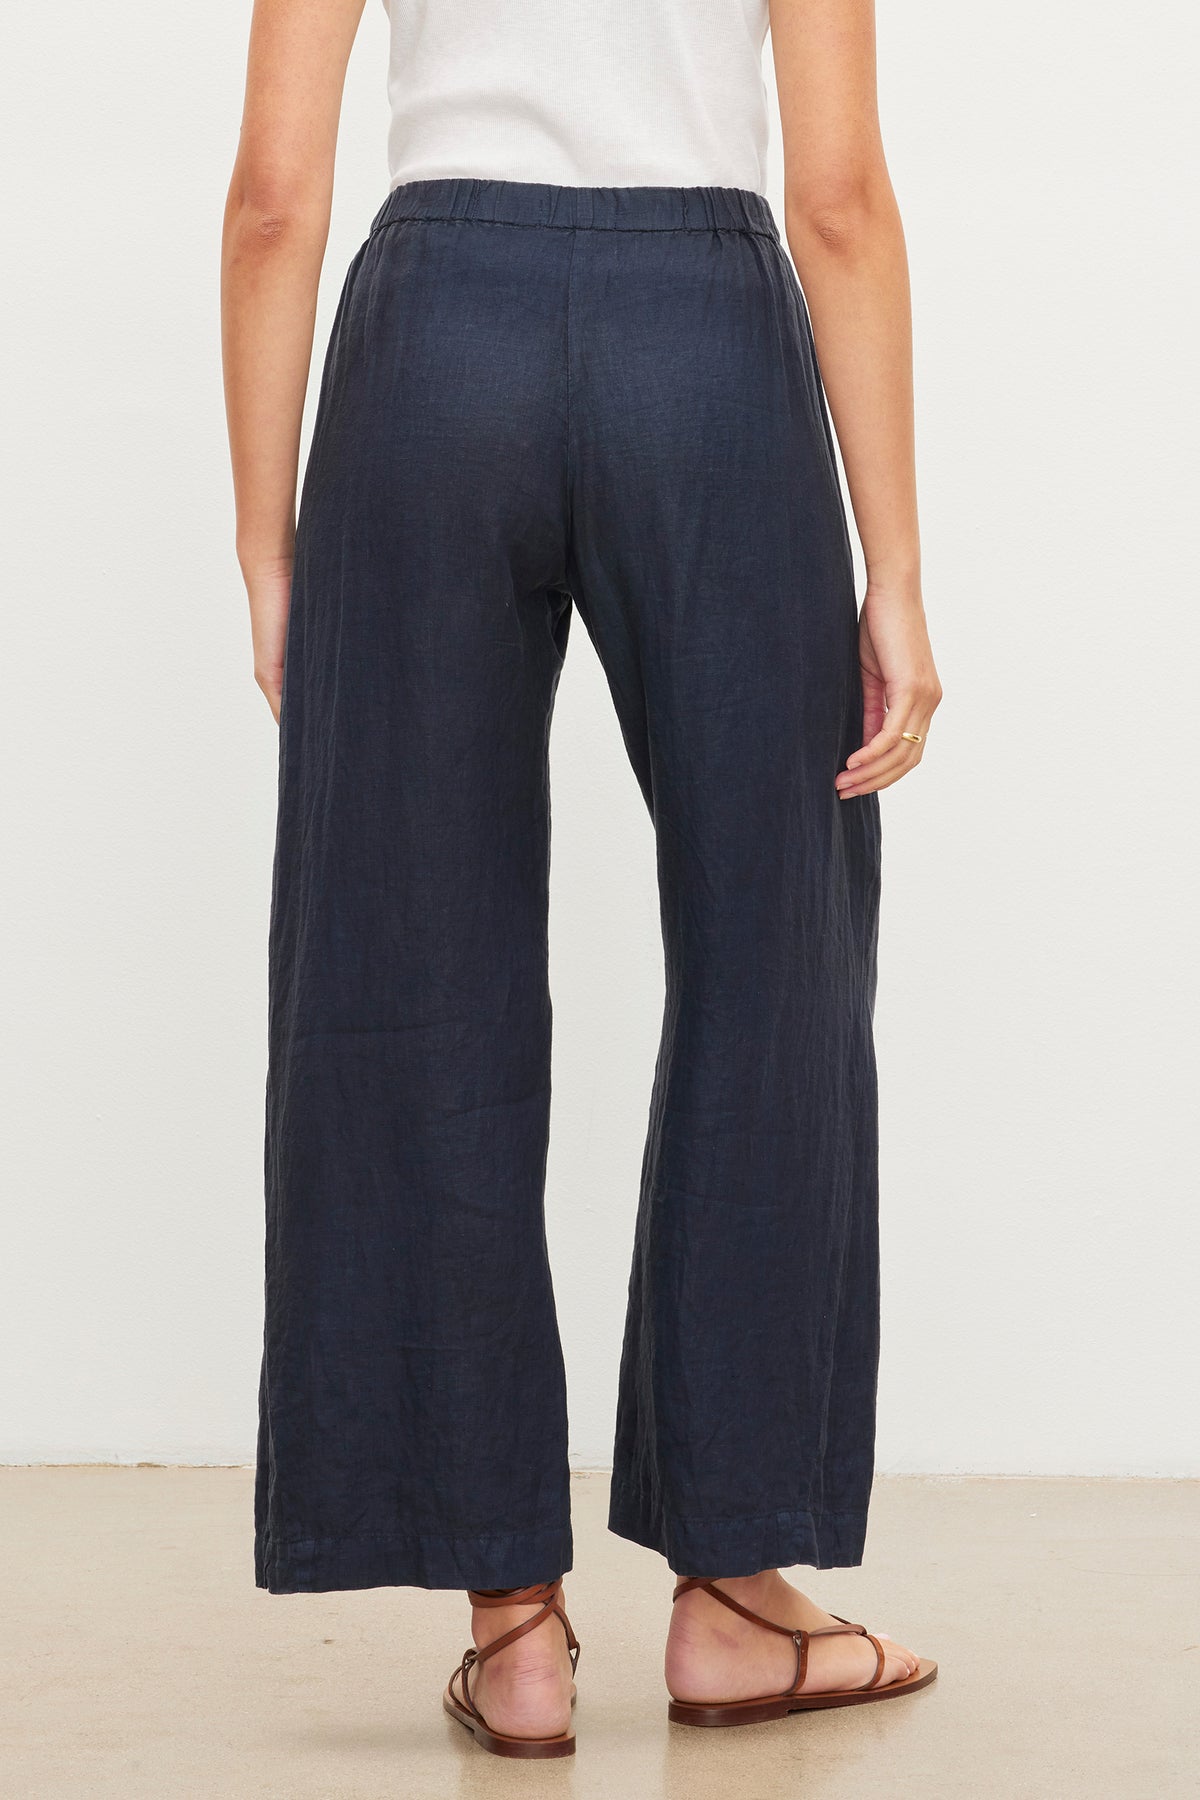   Woman standing, viewed from behind, wearing Loose Navy Blue LOLA LINEN PANT with an elastic waist and brown sandals by Velvet by Graham & Spencer. 